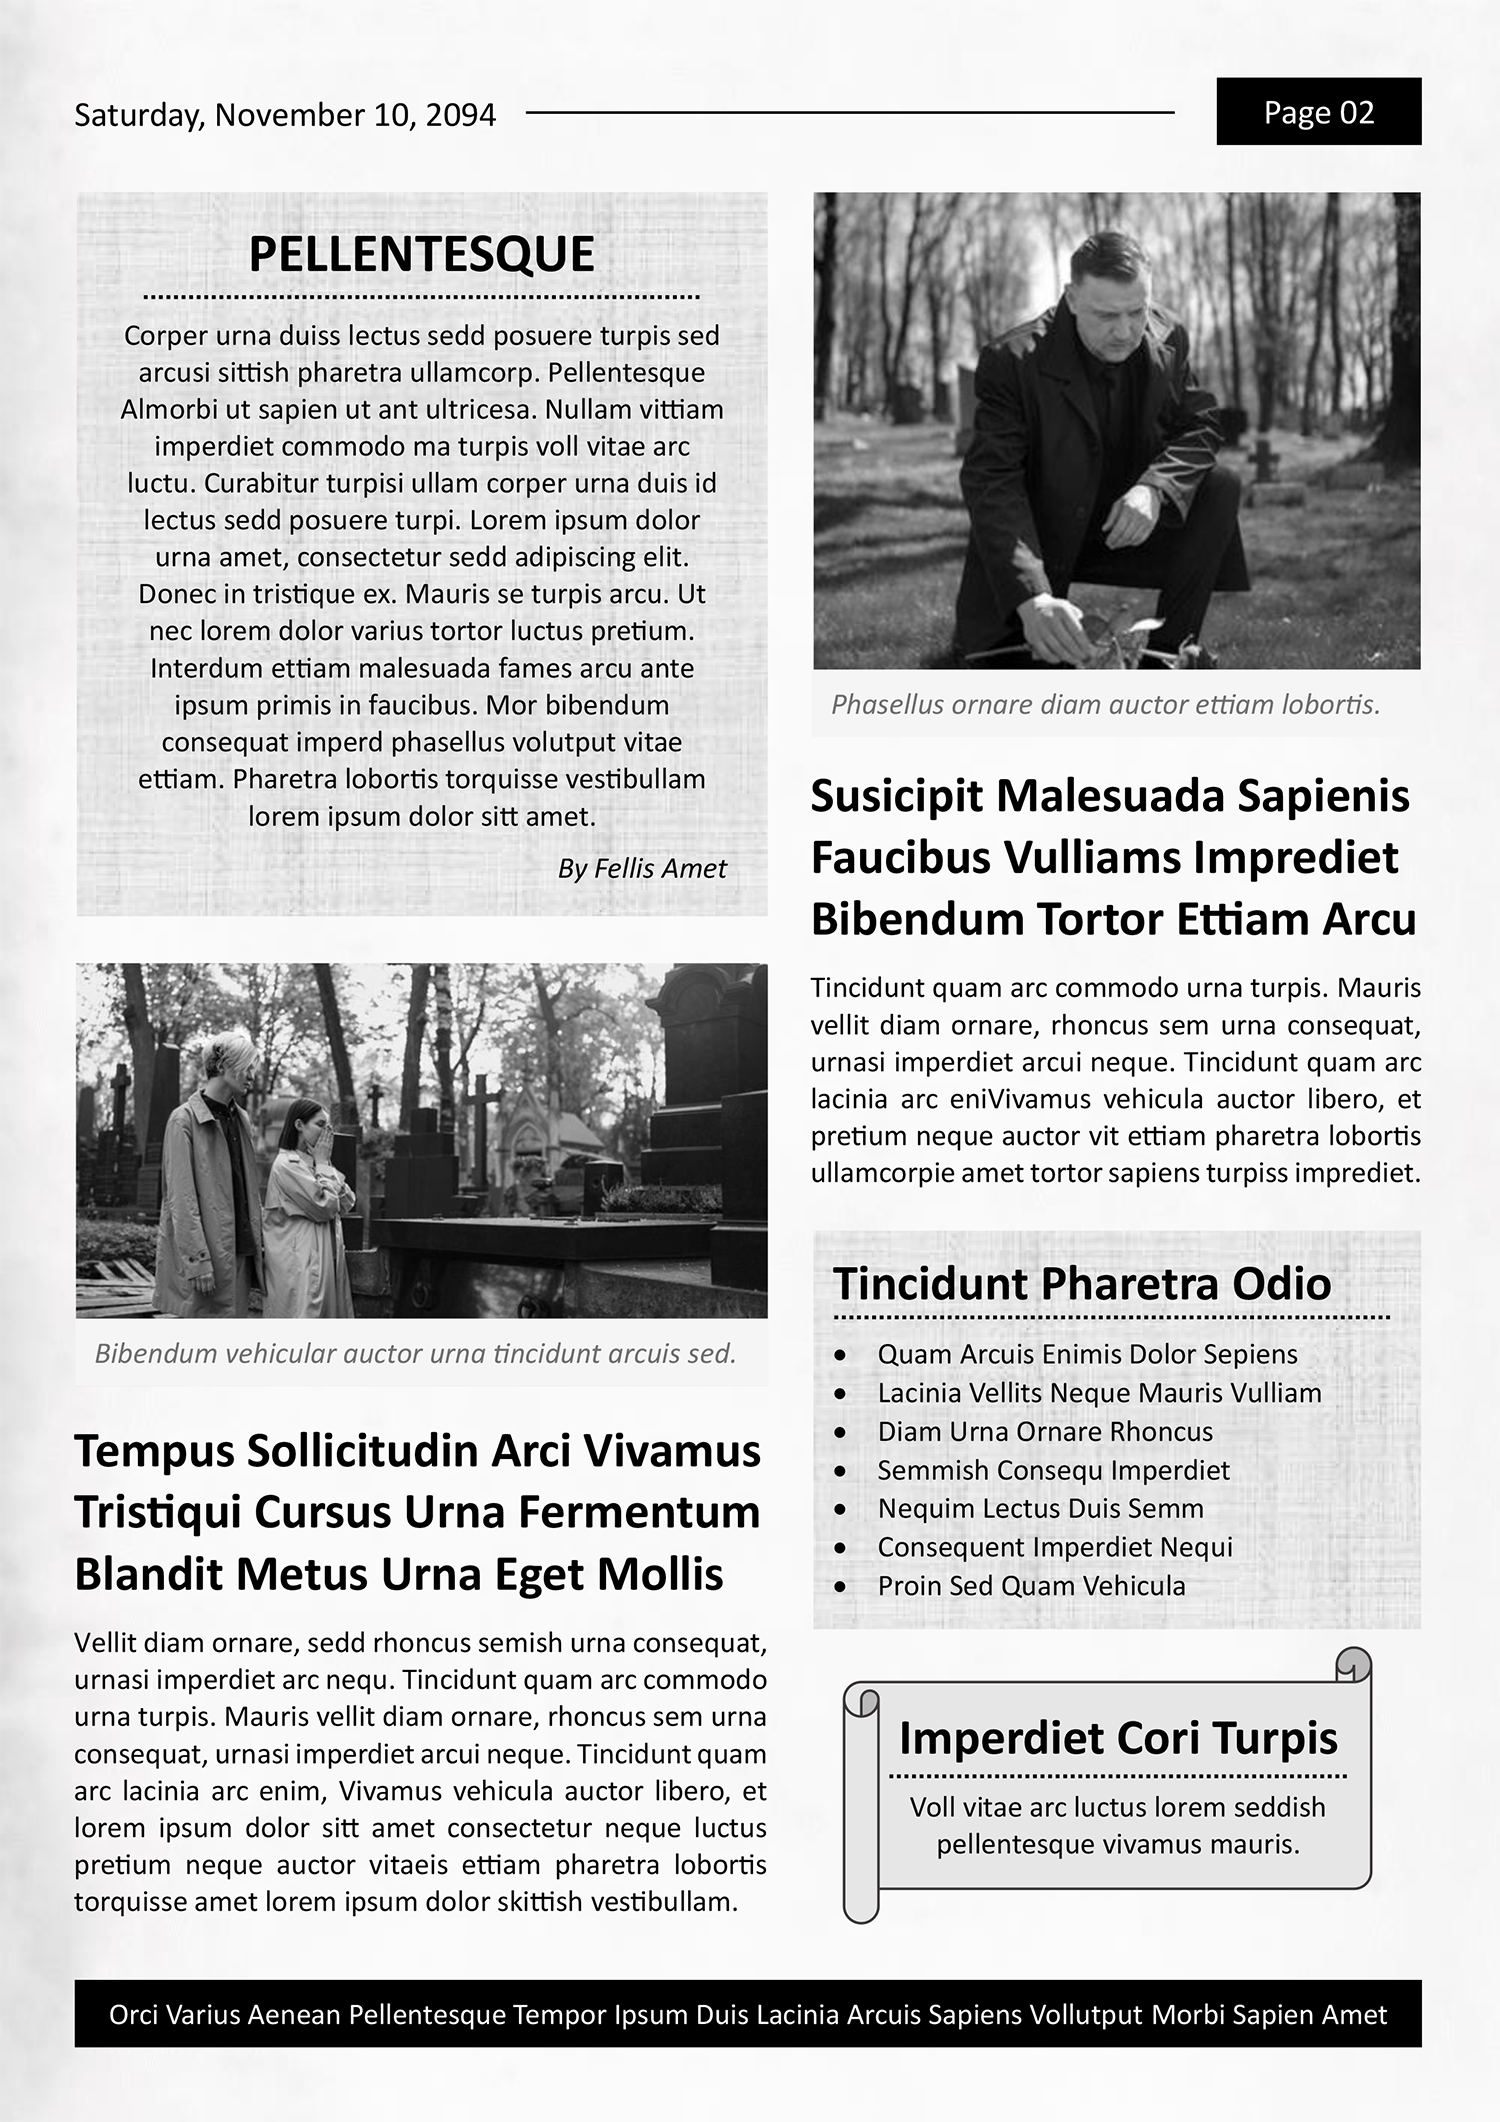 Black and White A4 Newspaper Obituary Template - Page 02